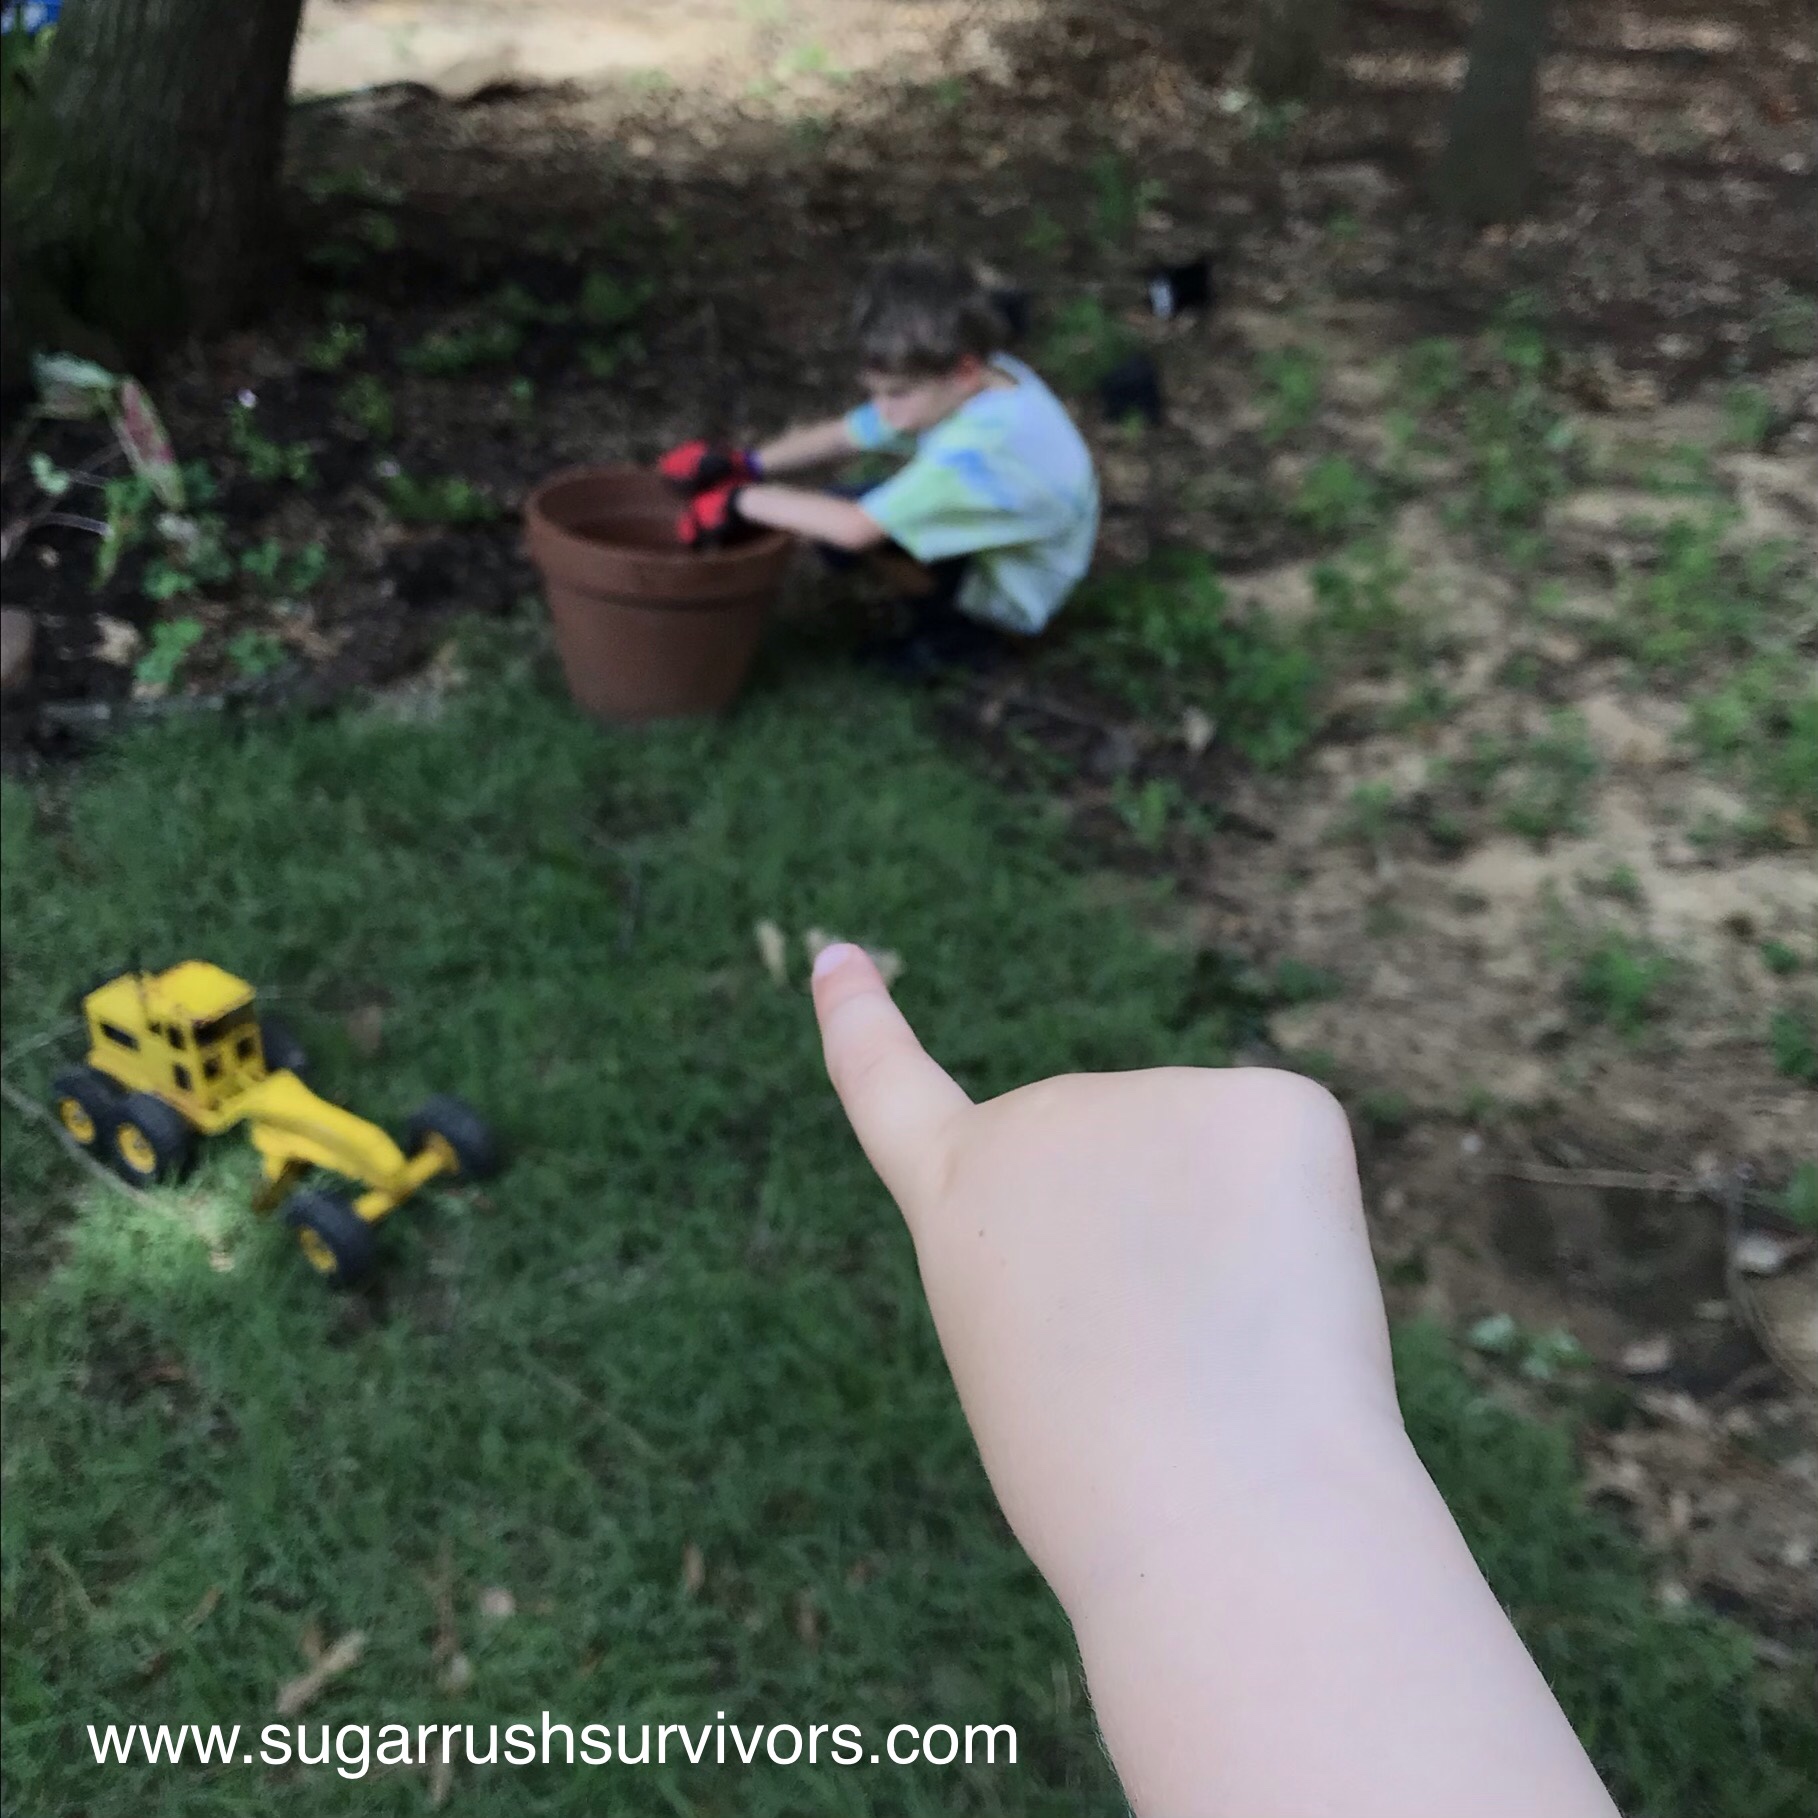 In the foreground a child's finger points to a young boy, blurred, in the background. The boy is crouched on the grass next to a large flowerpot. His posture is slouching and pouty. His arms rest on the flowerpot rim. A toy yellow tractor rests on the grass.